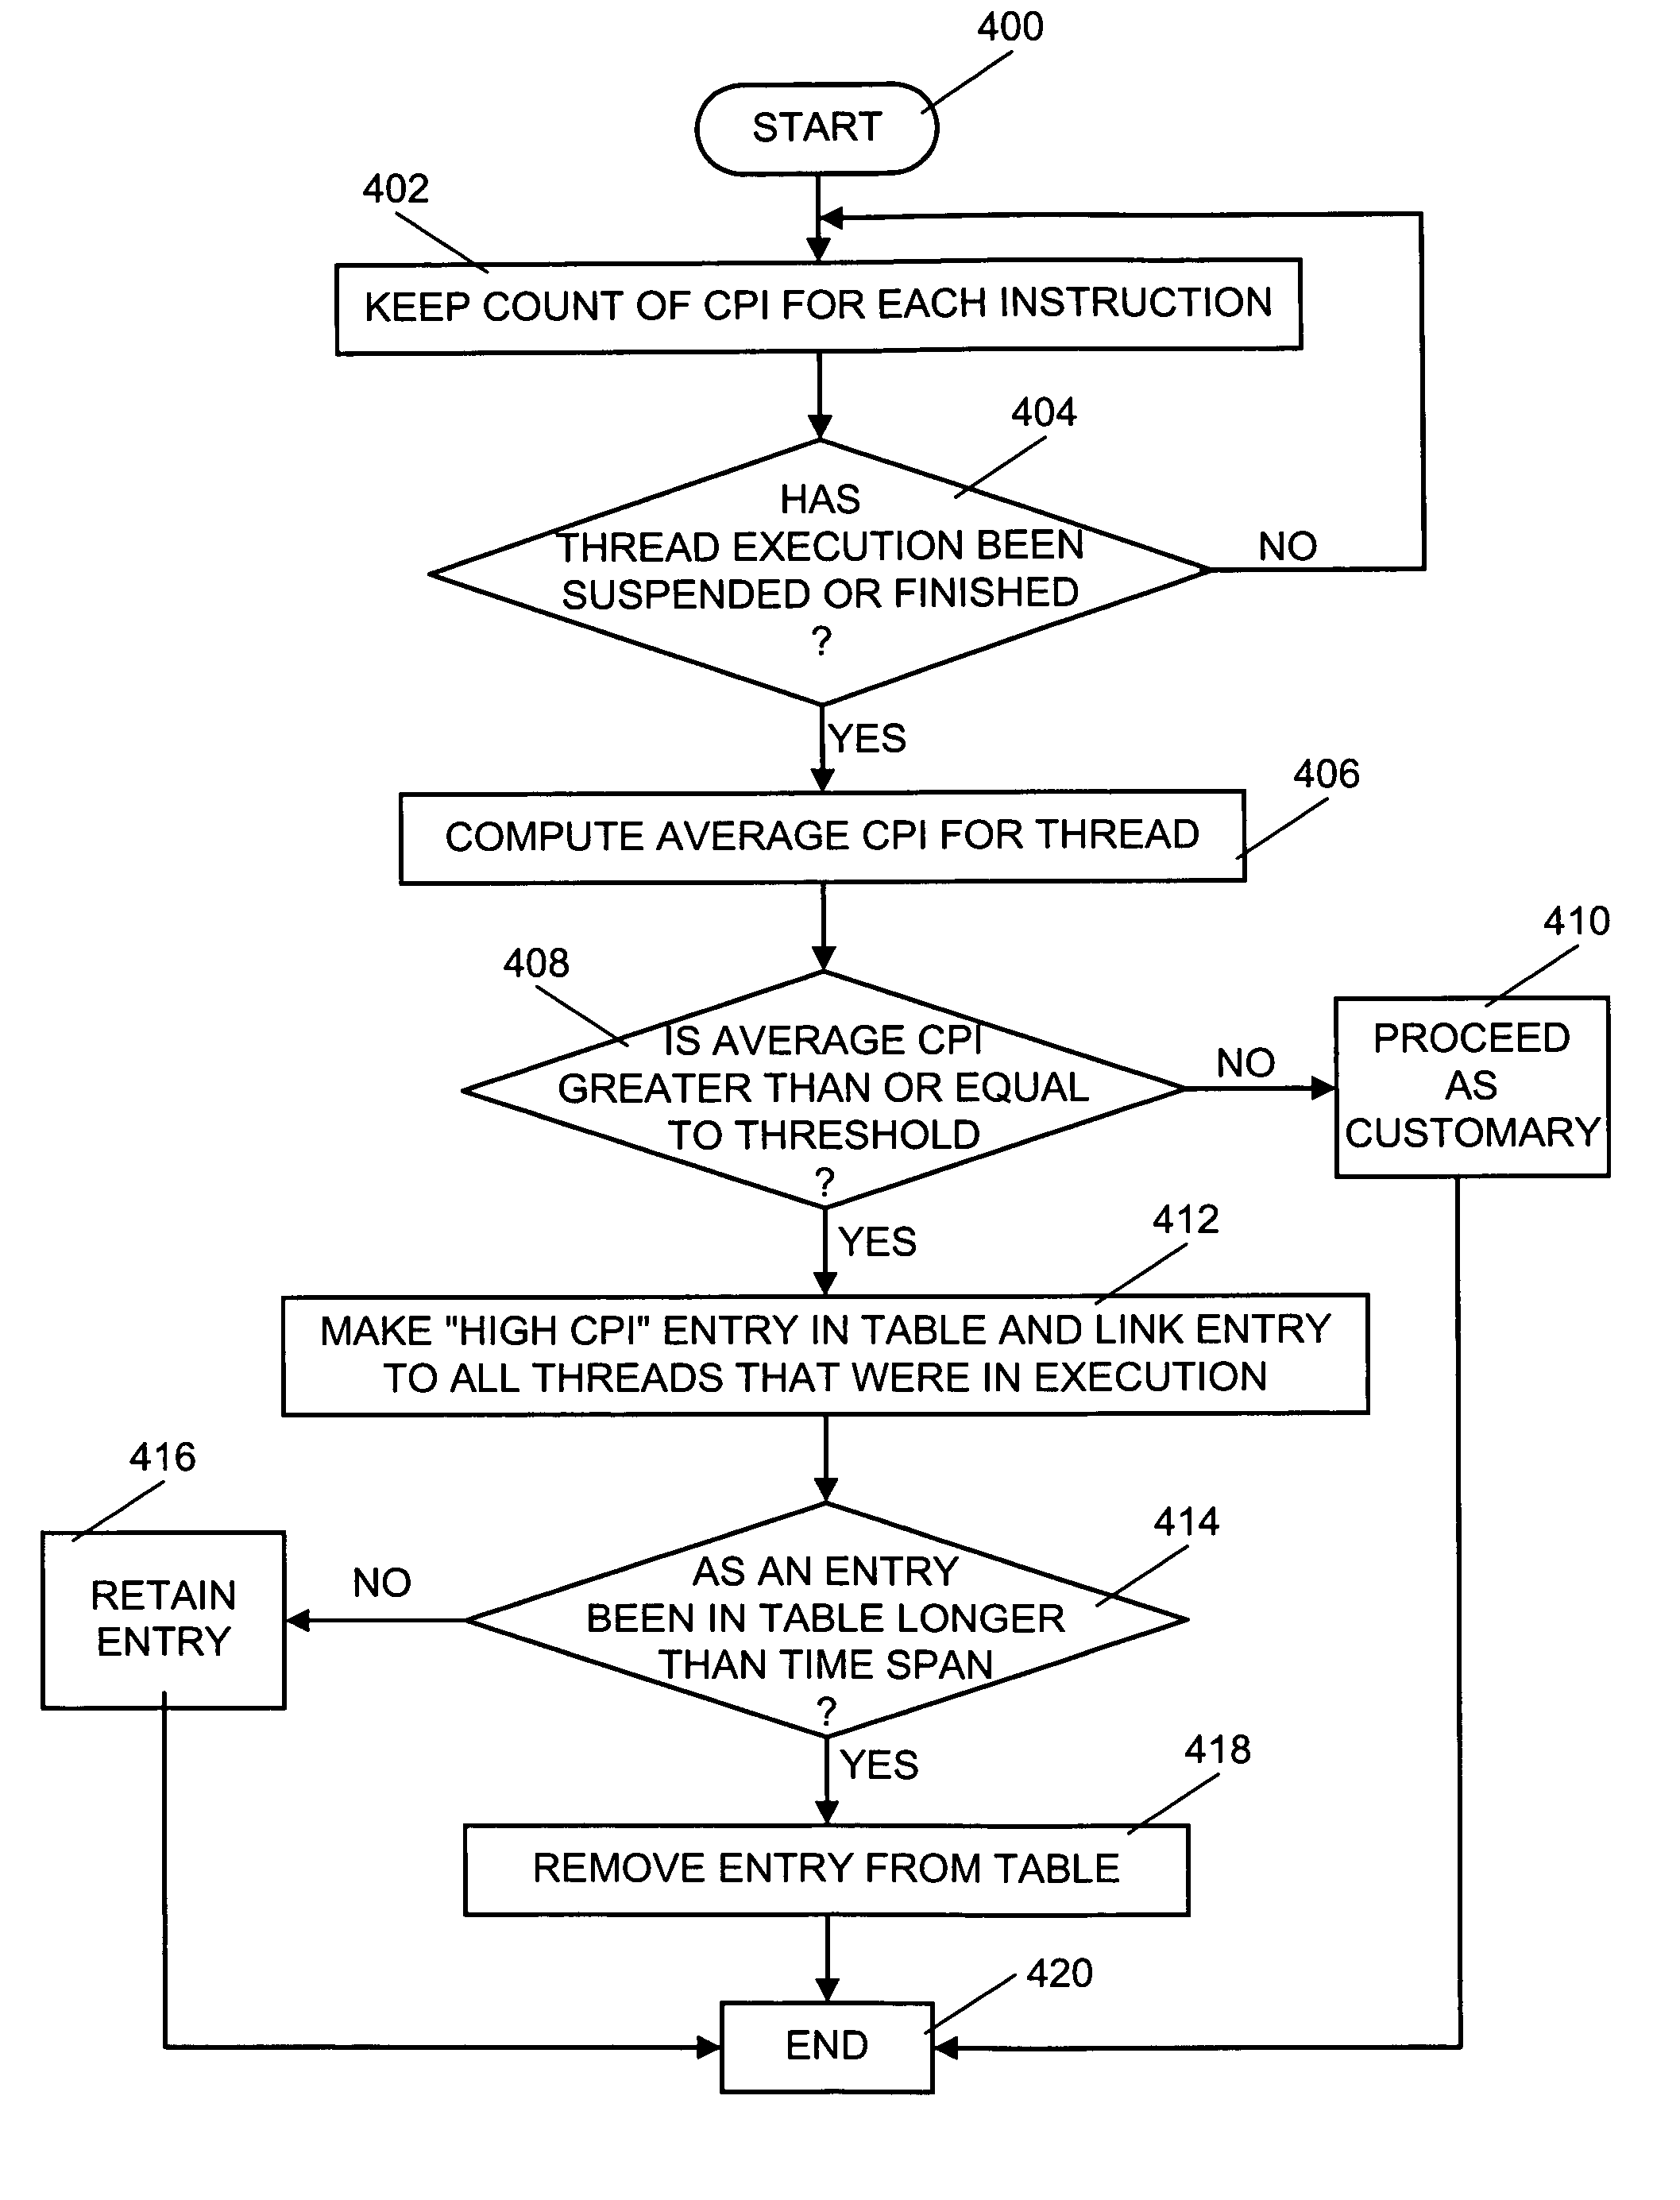 System, application and method of reducing cache thrashing in a multi-processor with a shared cache on which a disruptive process is executing